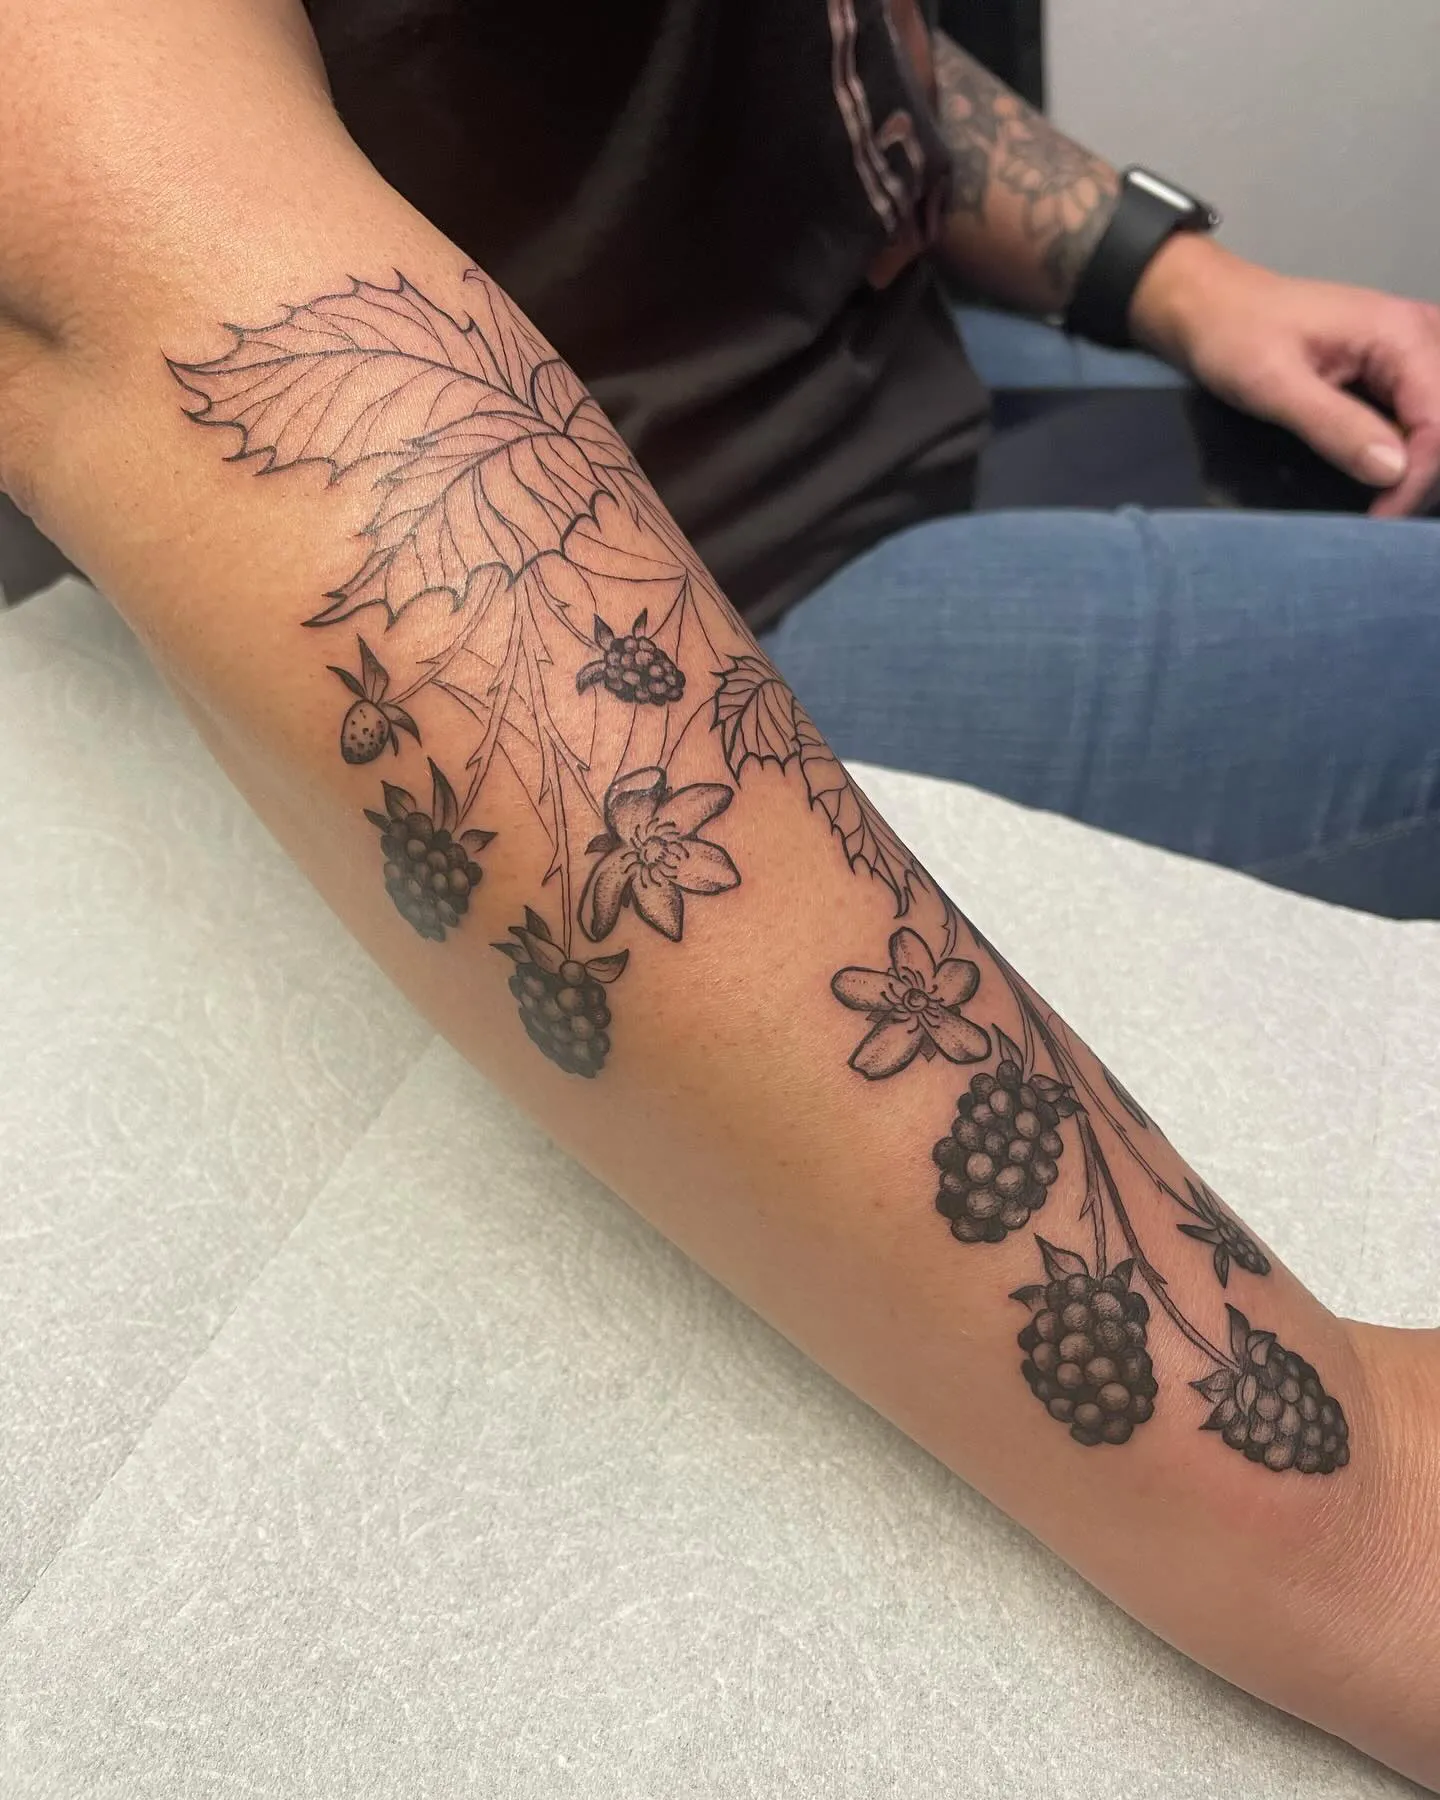 Subtle blackberry tattoo meaning on forearm